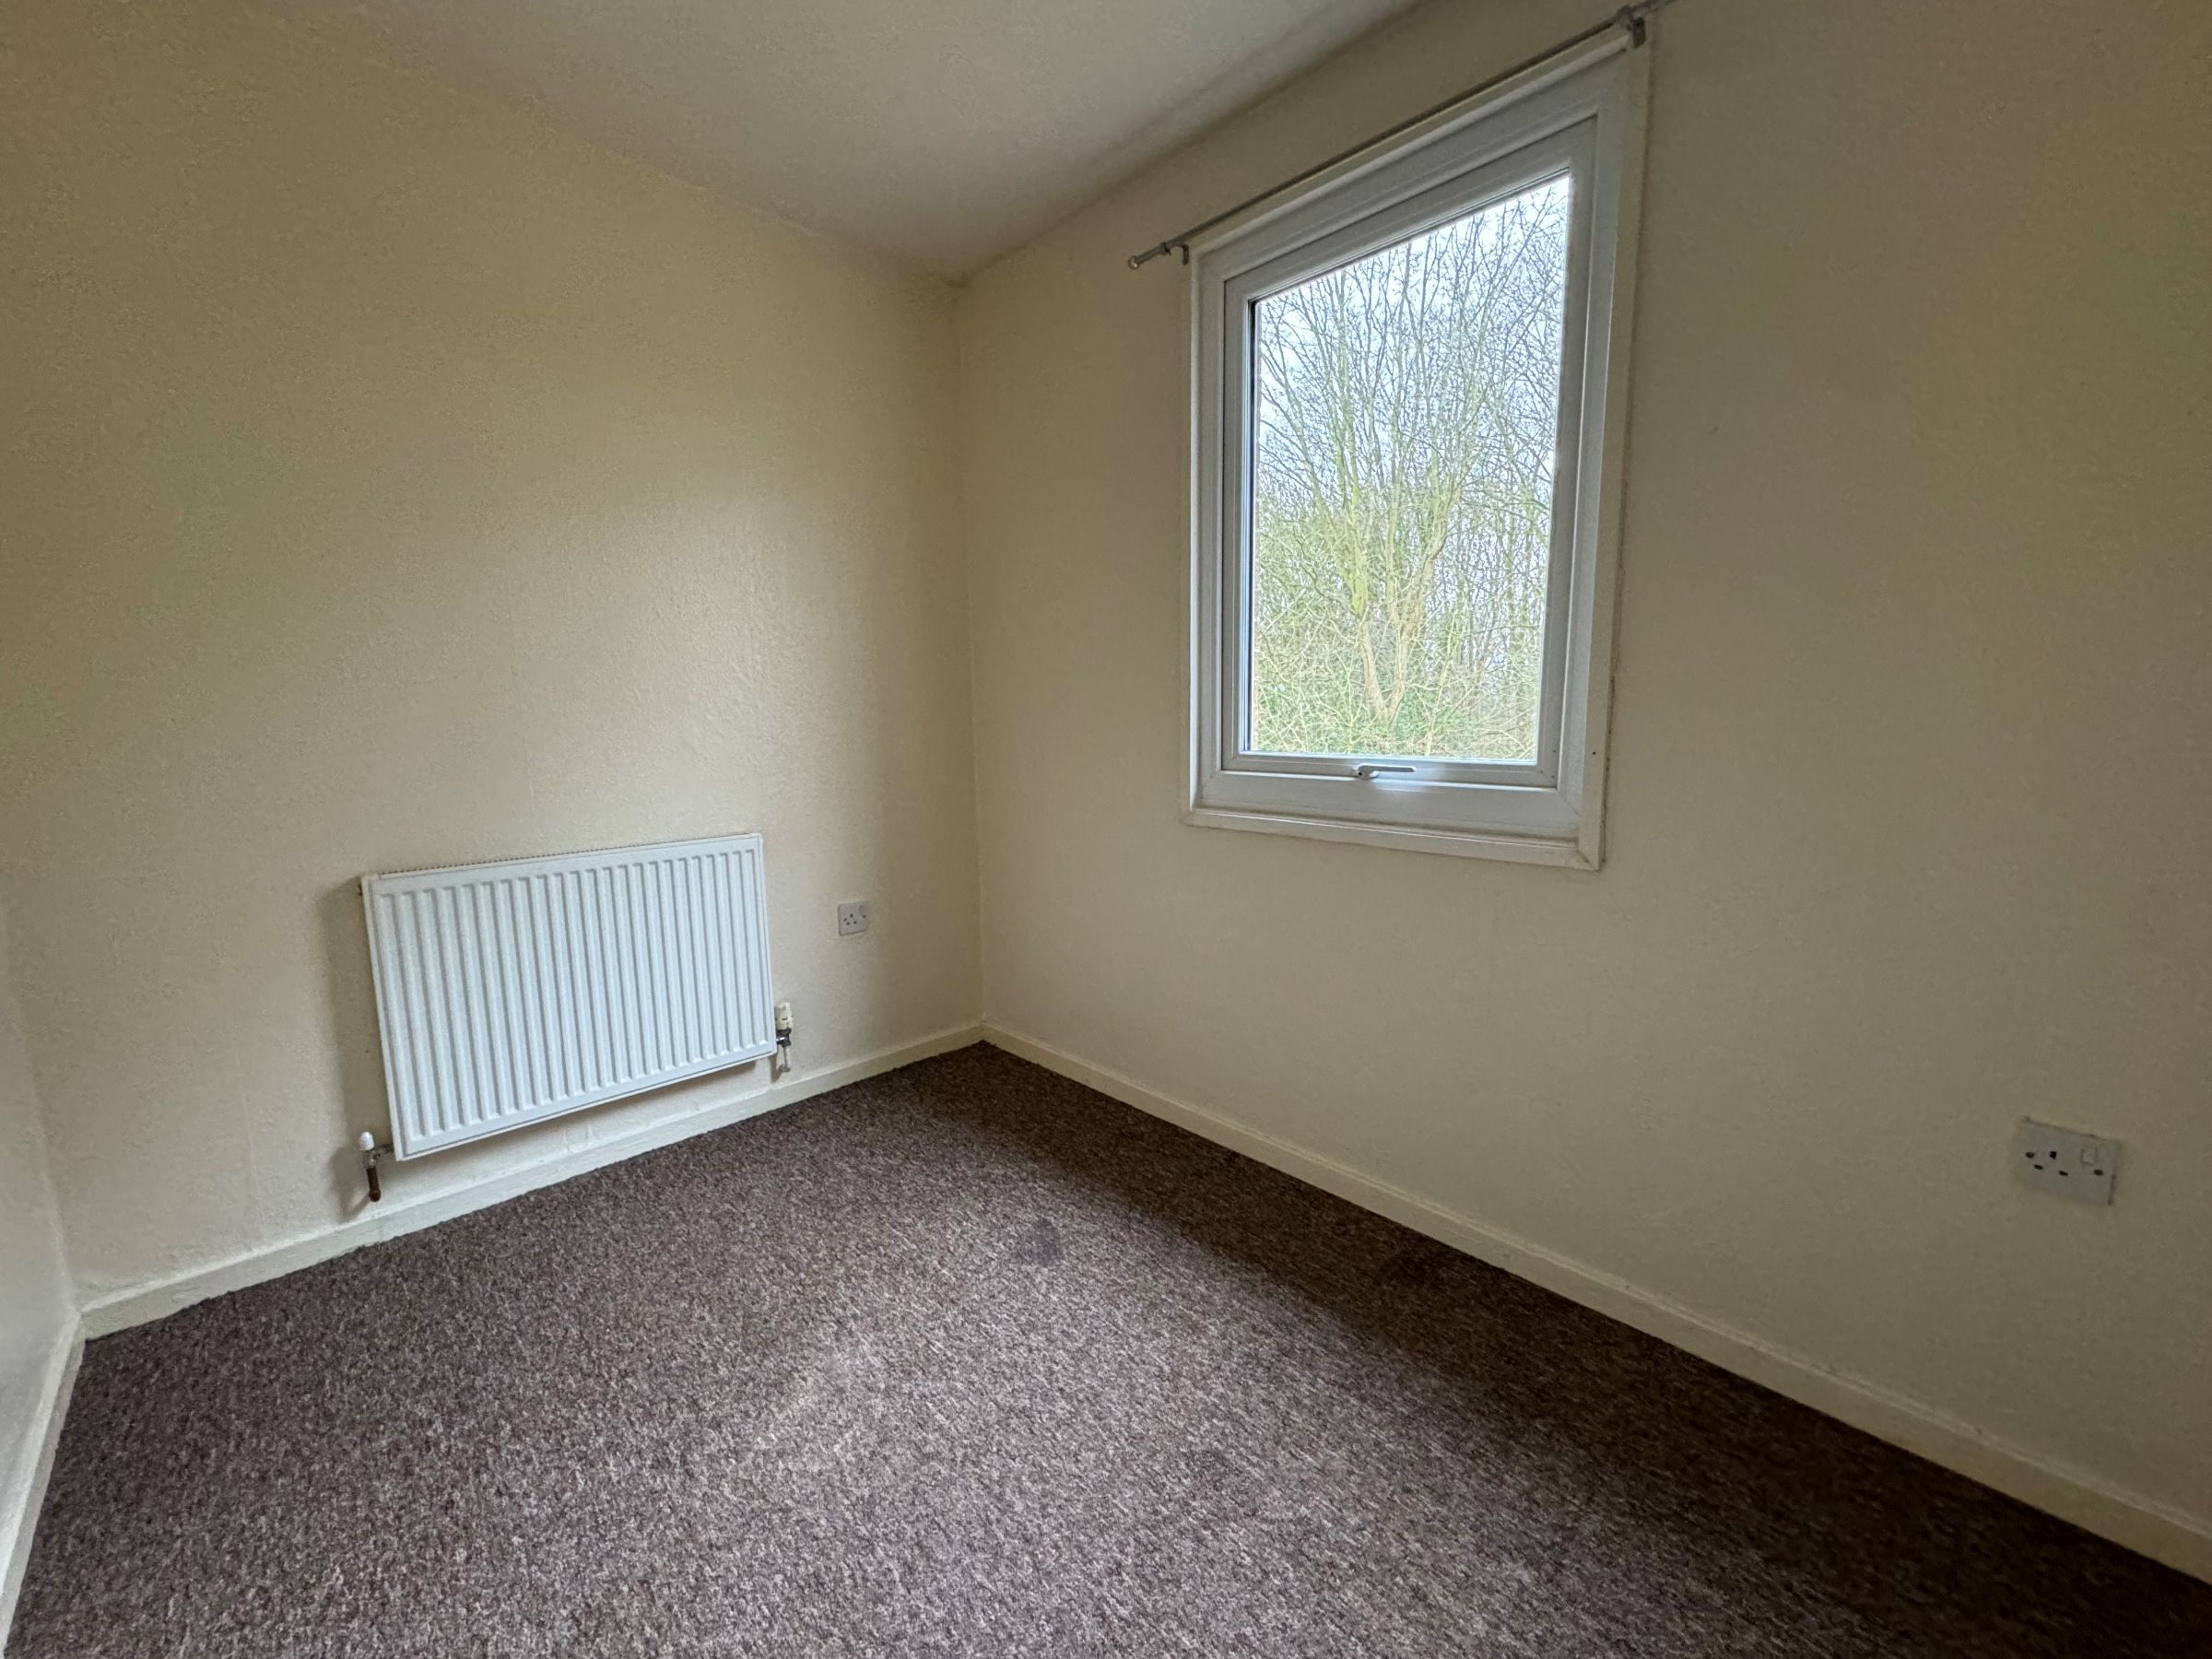 3 bed terraced house for sale in Manton, Peterborough  - Property Image 8